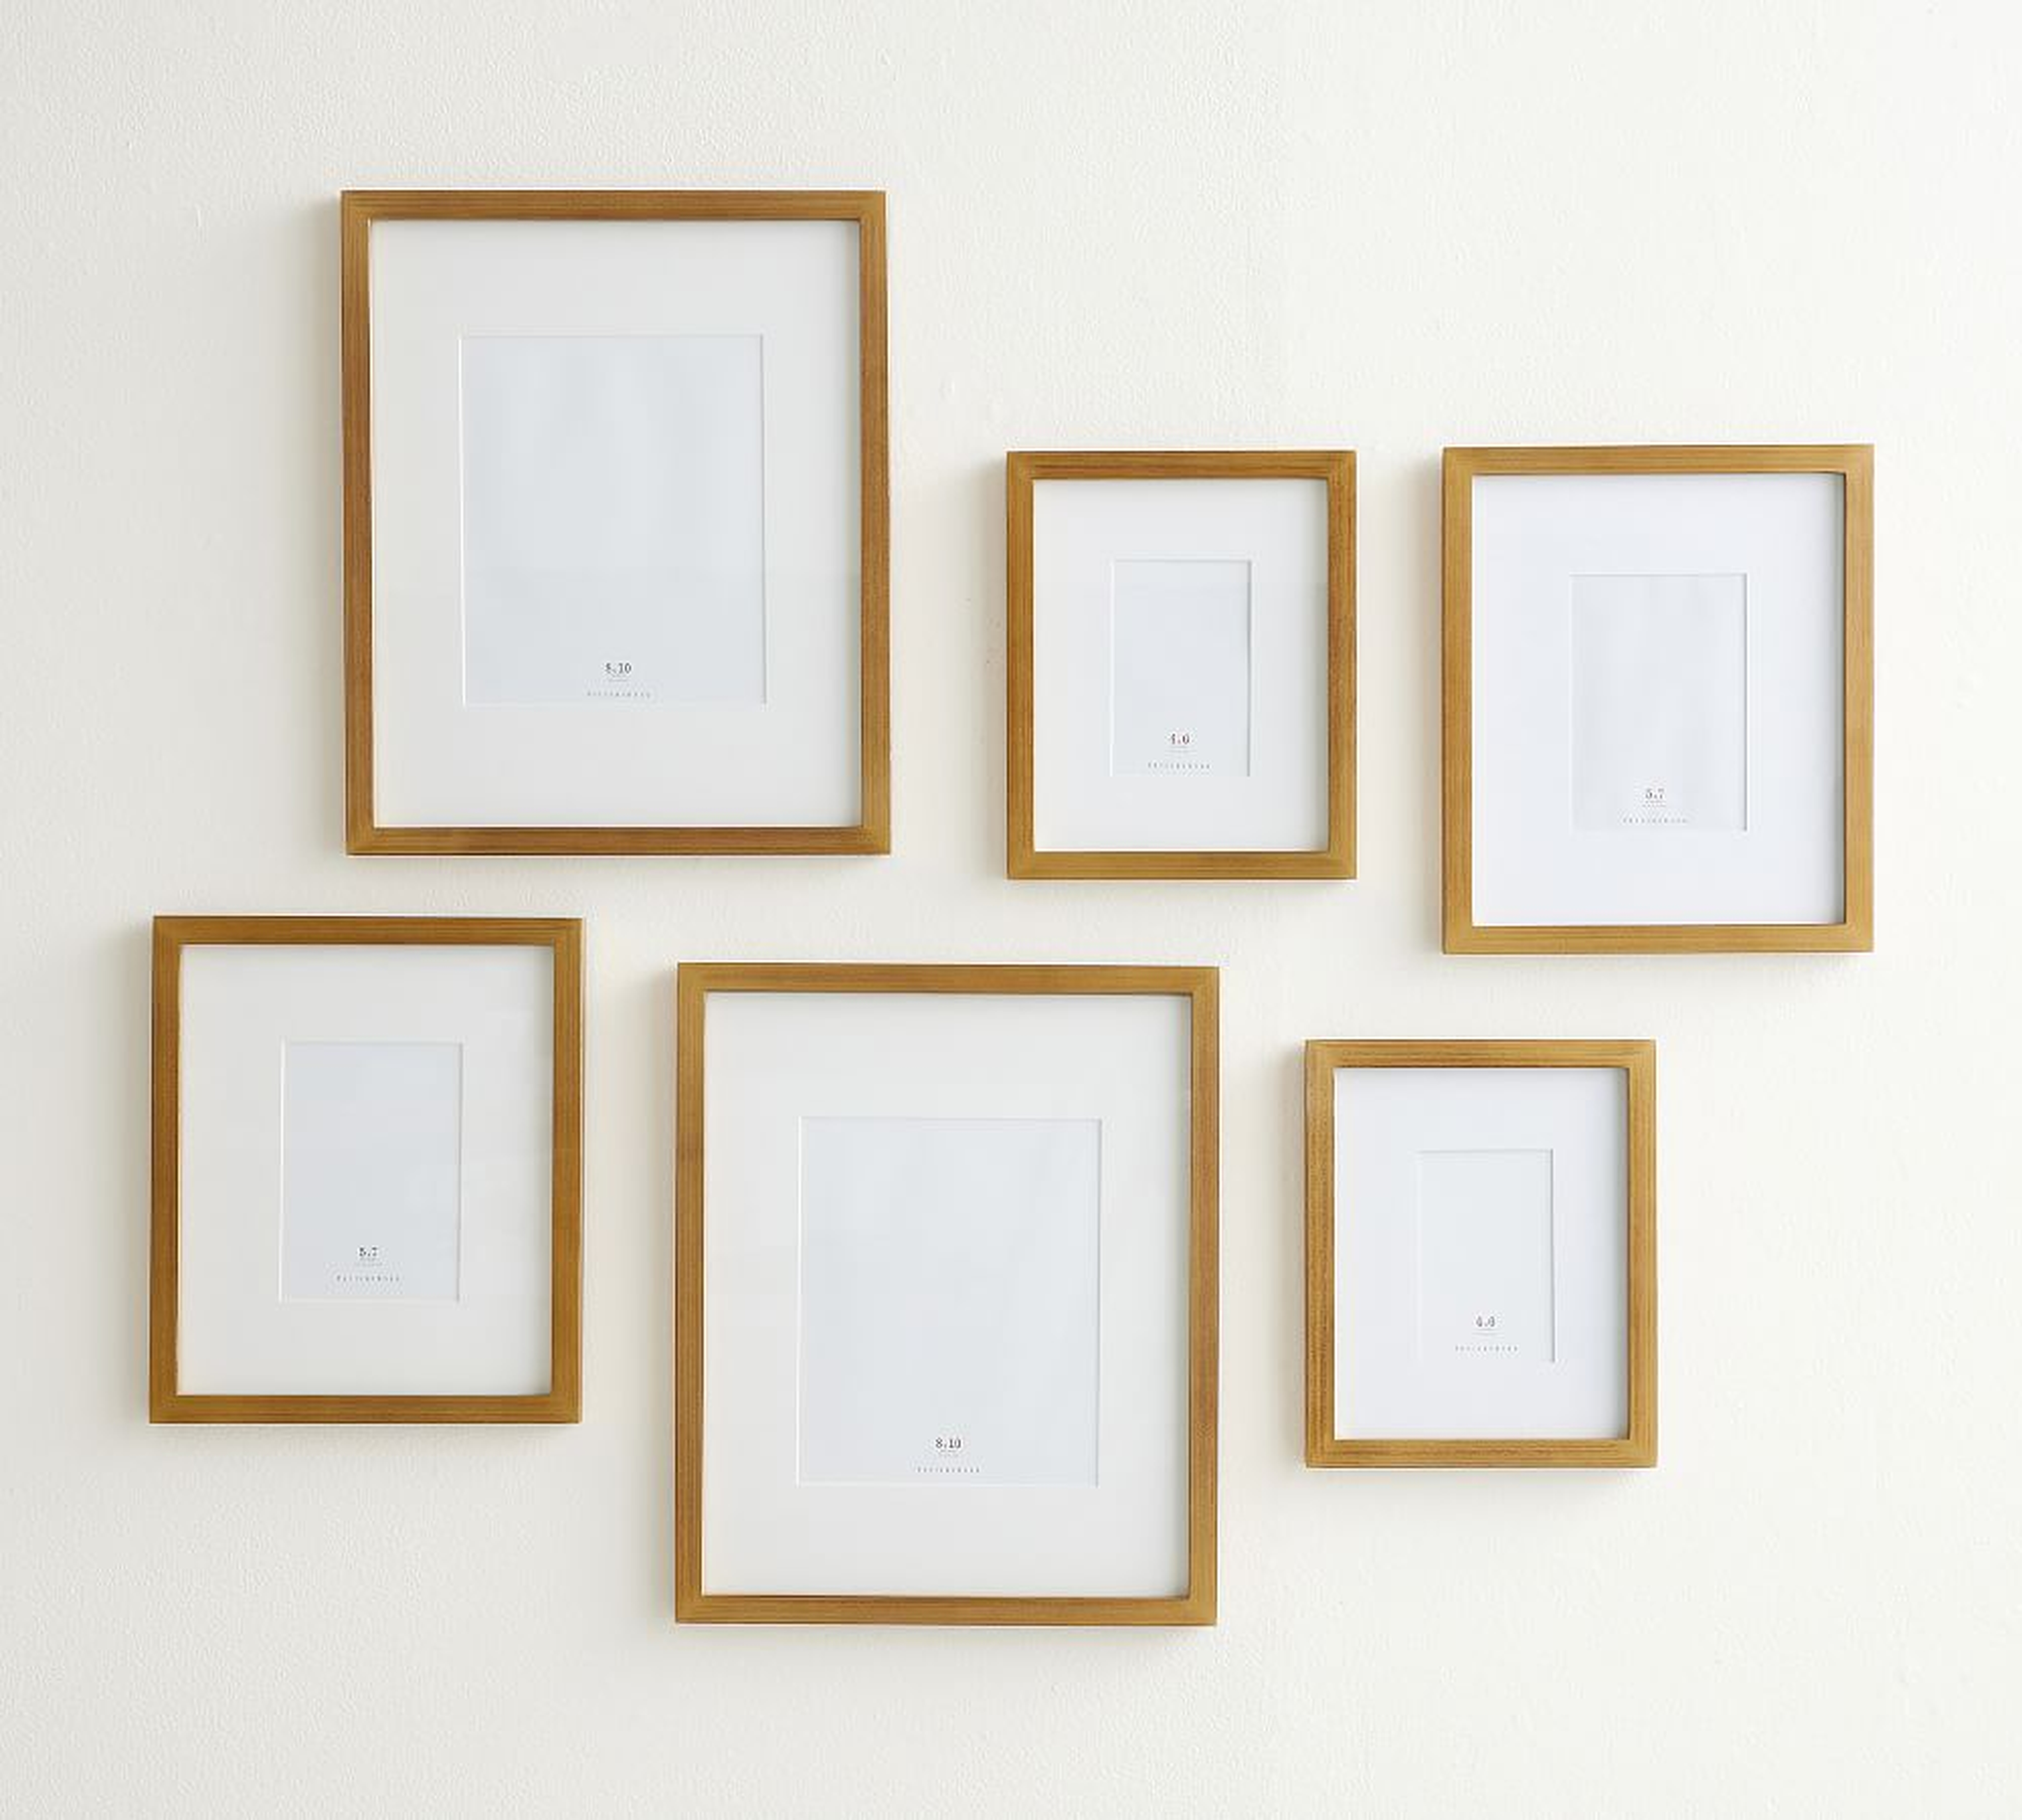 Gilt Wood Gallery Frames in a Box, Gold, Set of 6 - Pottery Barn